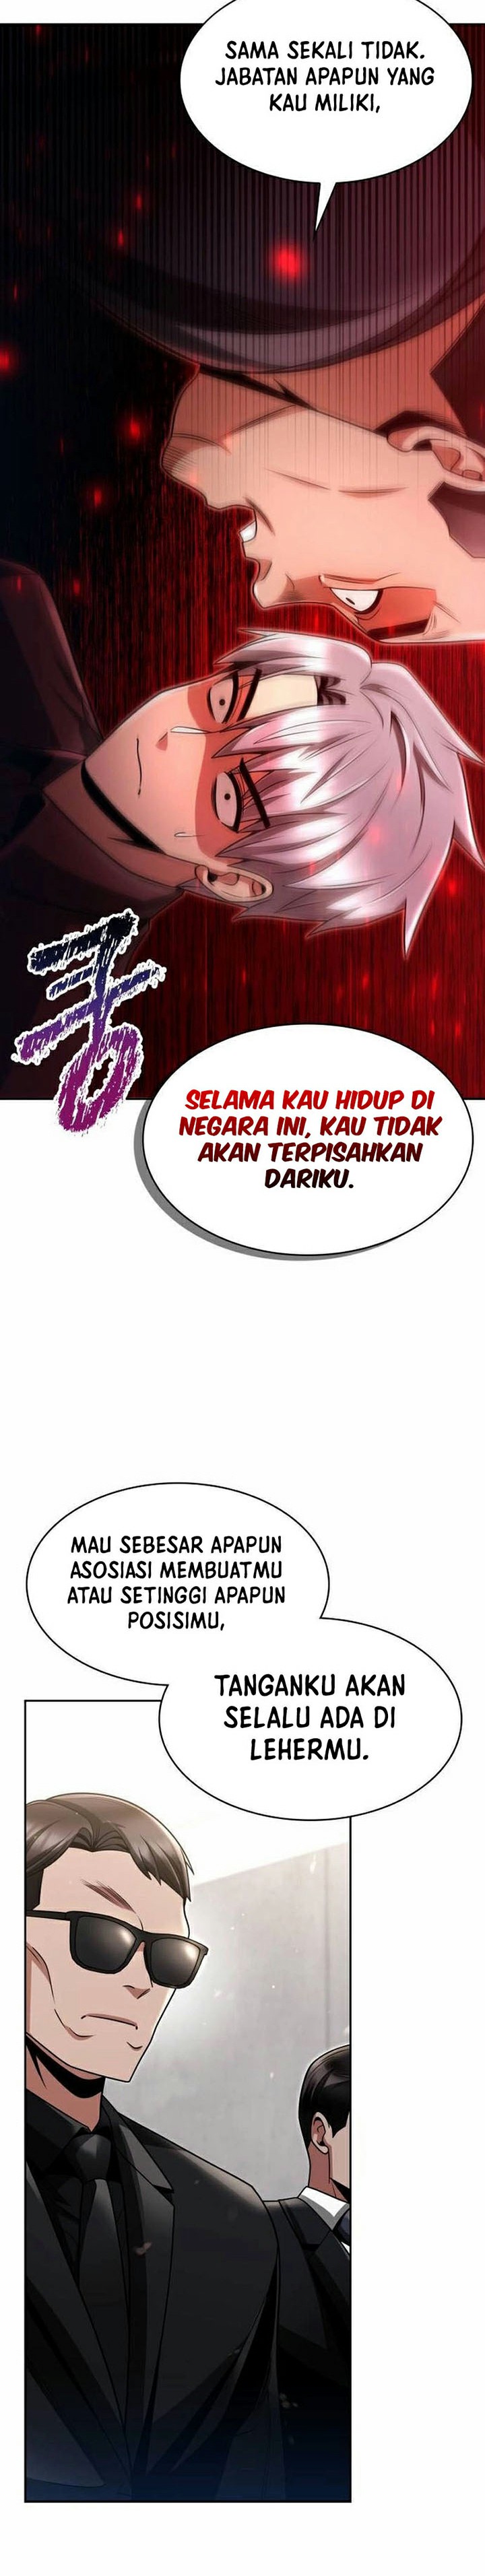 Dilarang COPAS - situs resmi www.mangacanblog.com - Komik clever cleaning life of the returned genius hunter 062 - chapter 62 63 Indonesia clever cleaning life of the returned genius hunter 062 - chapter 62 Terbaru 26|Baca Manga Komik Indonesia|Mangacan